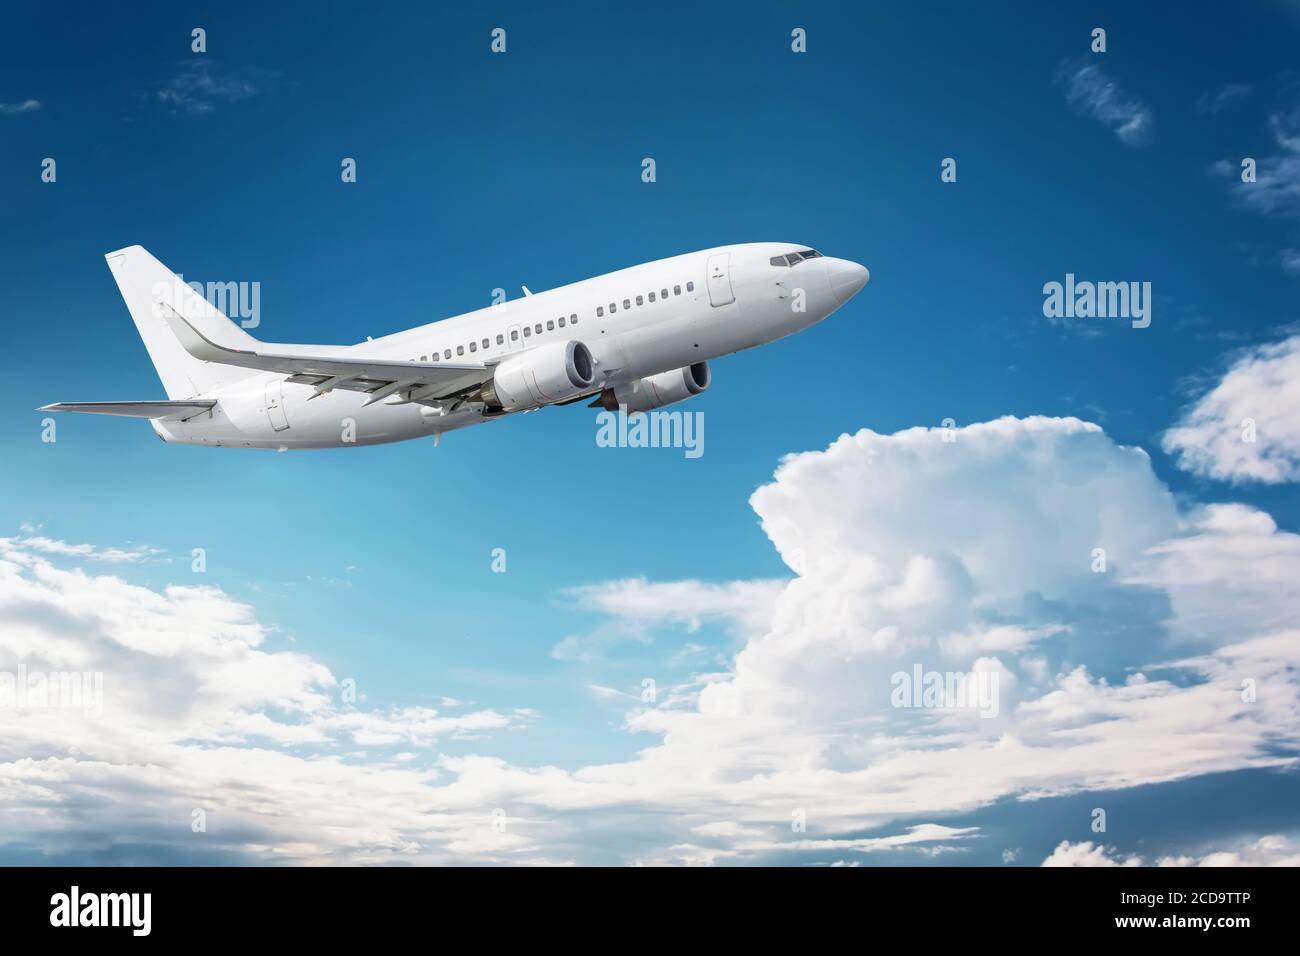 Civil aircraft flying into deep blue skies with some cloud Stock Photo